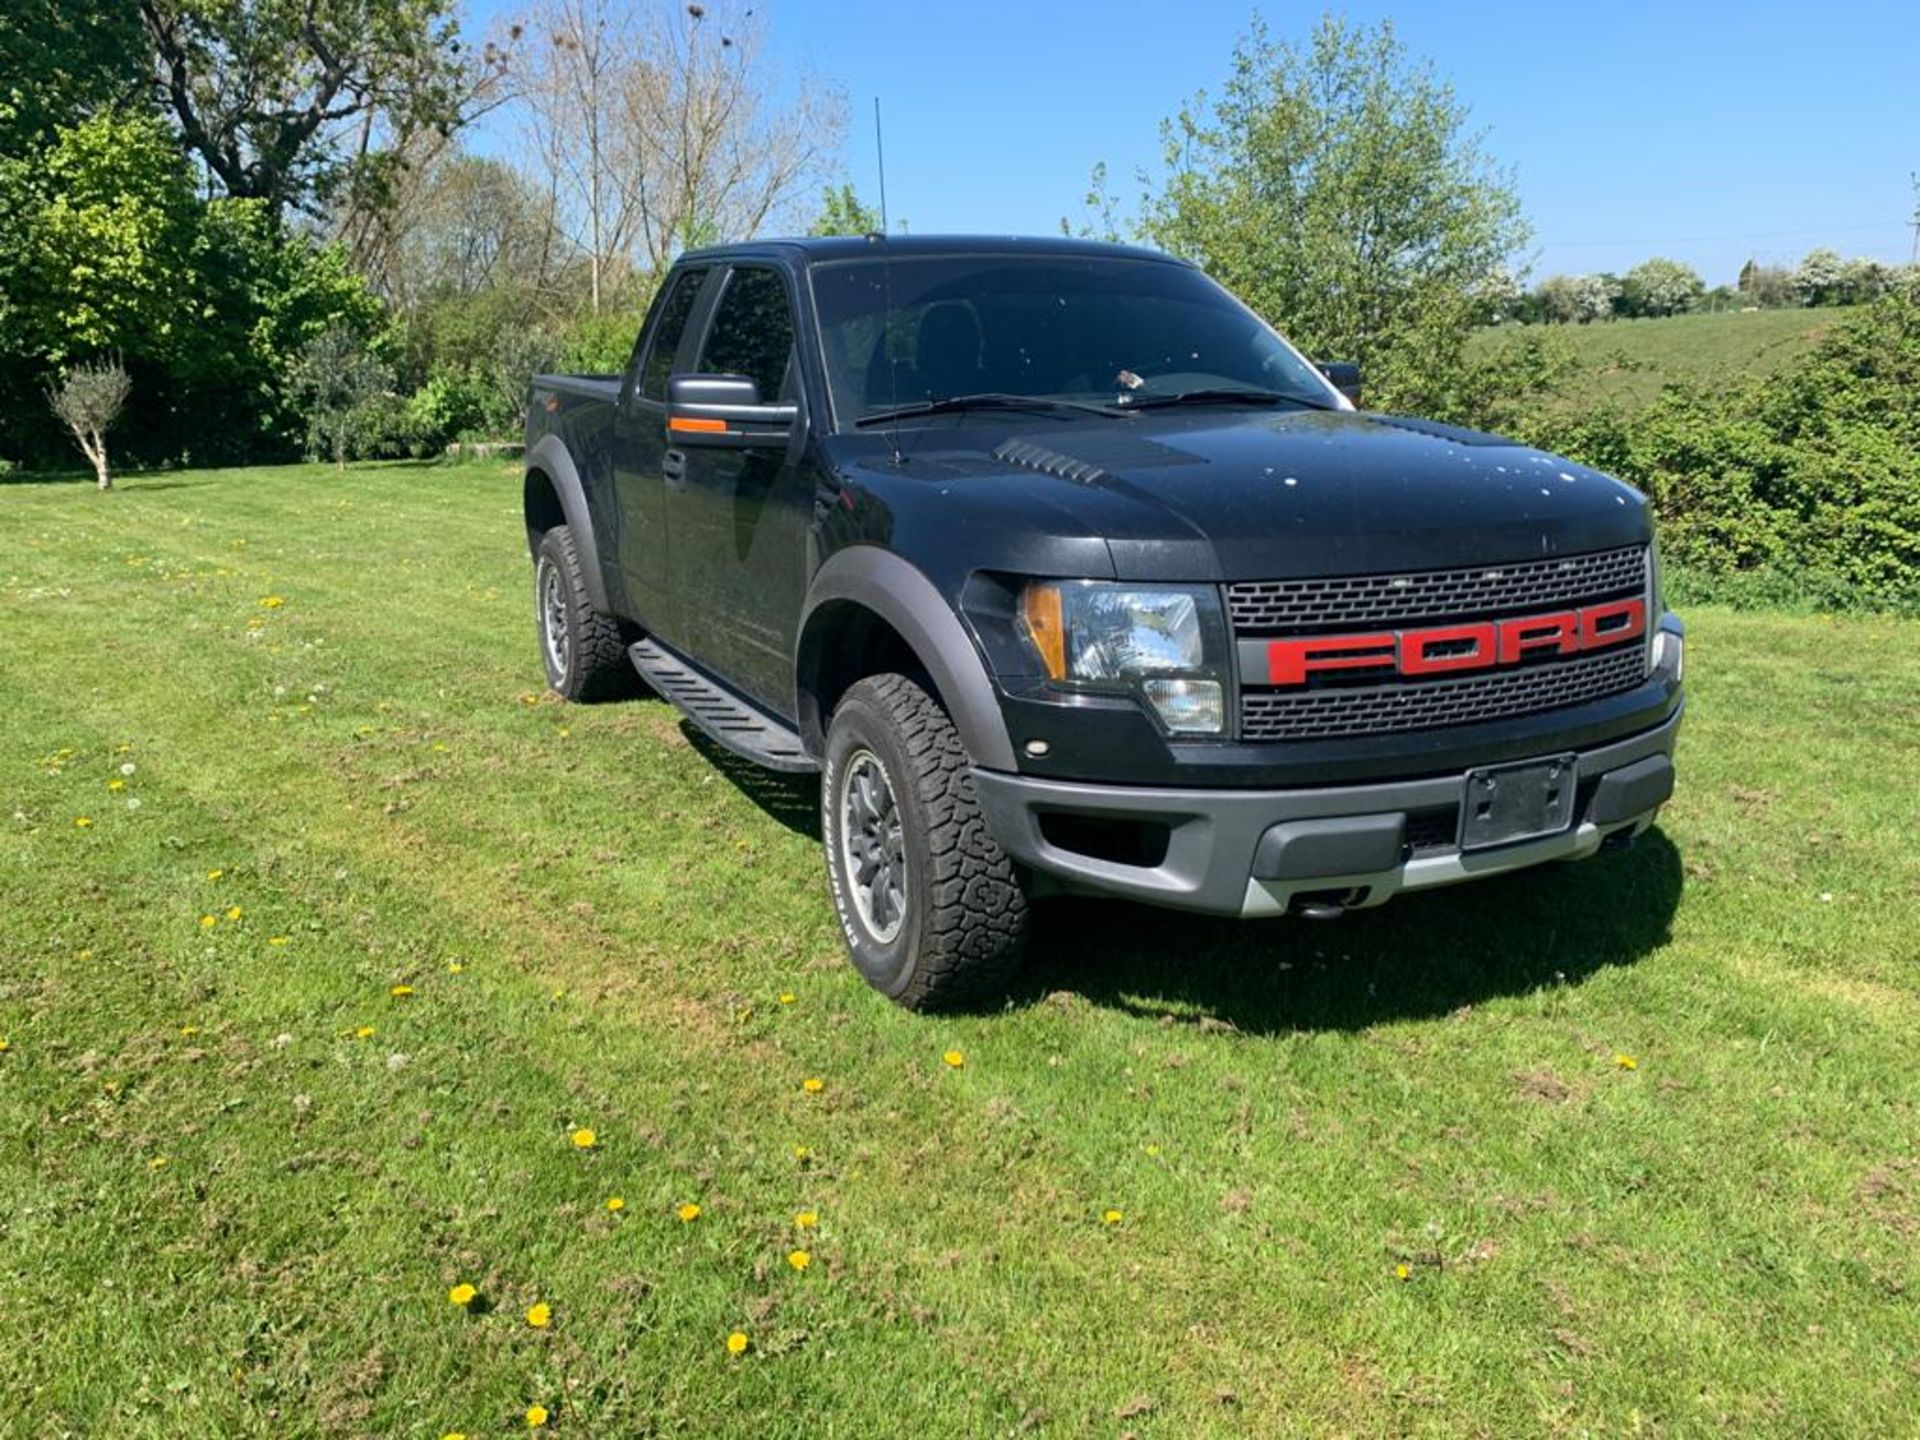 2012 FORD F-150 6.2L V8 RAPTOR - 65,000 MILES, LOTS OF UPGRADED PARTS, READY IN UK WITH NOVA APP - Image 5 of 18